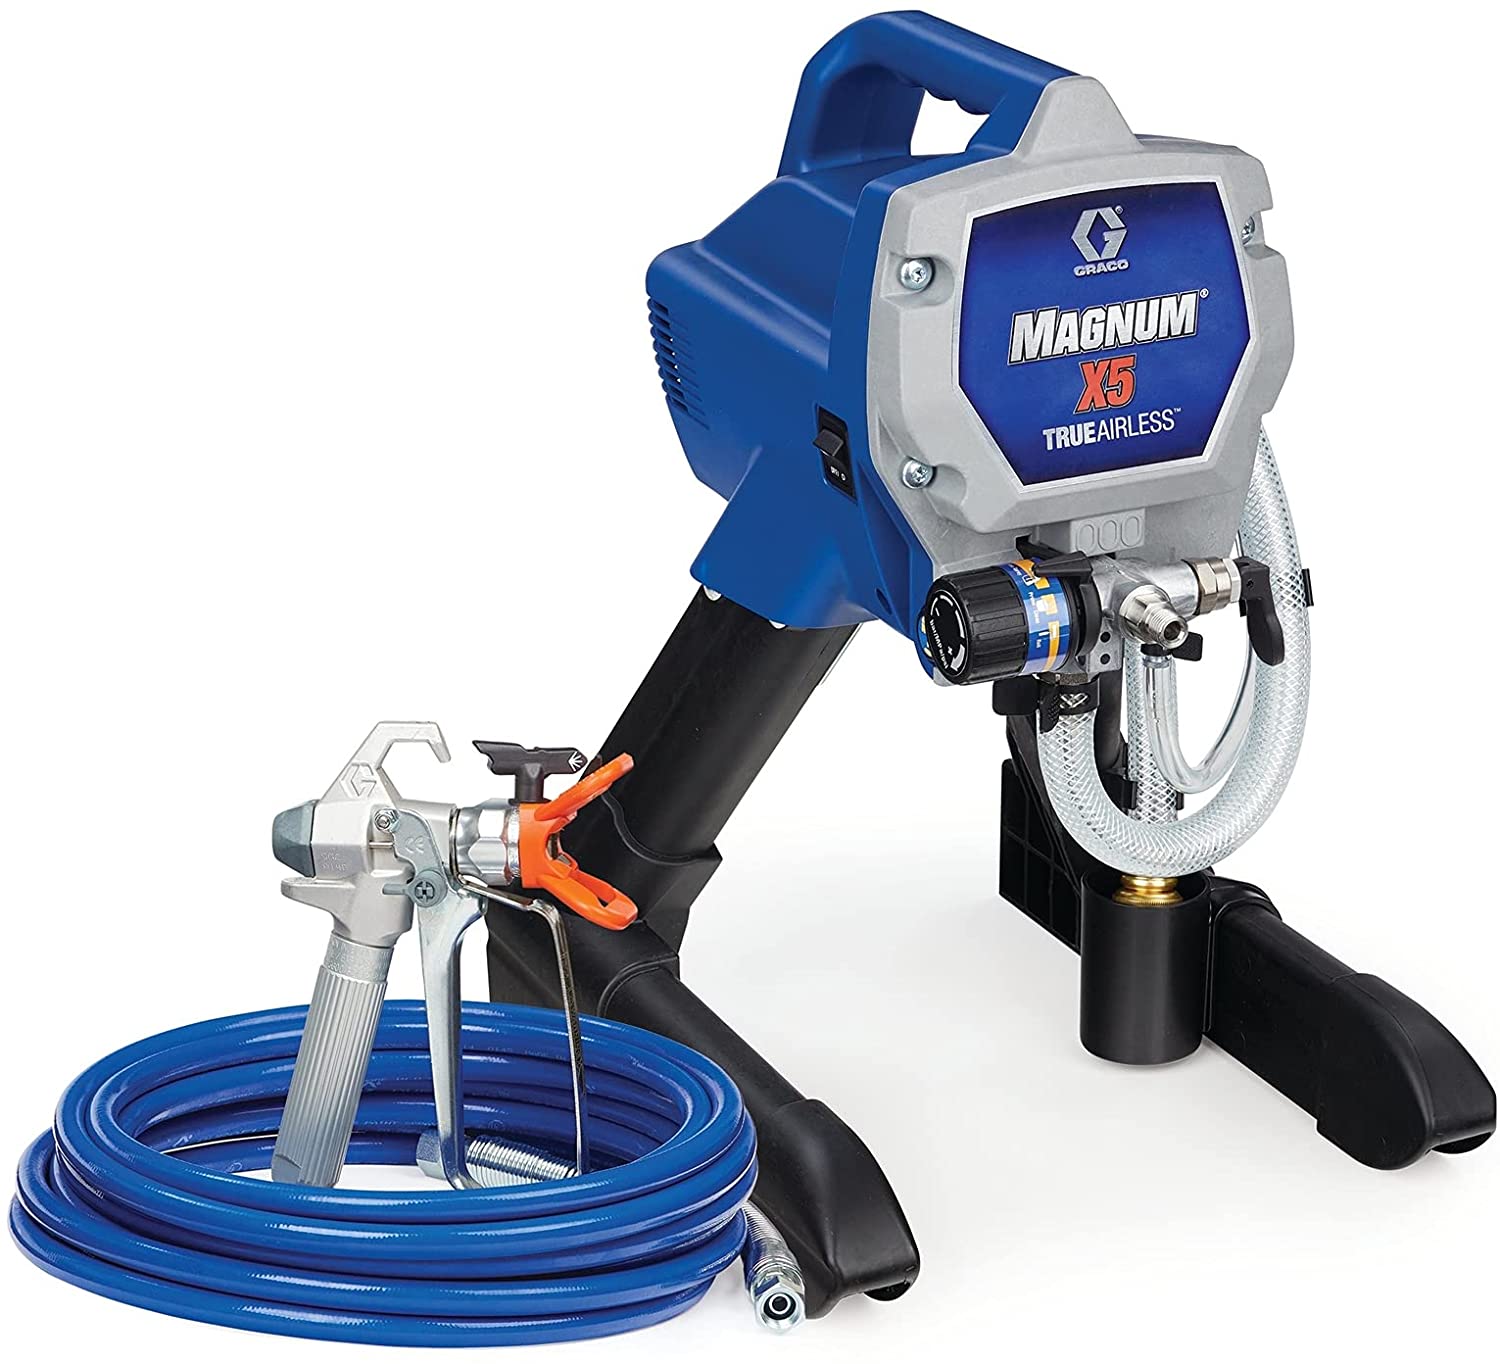 Graco Magnum 262800 X5 Stand Airless Paint Sprayer, 